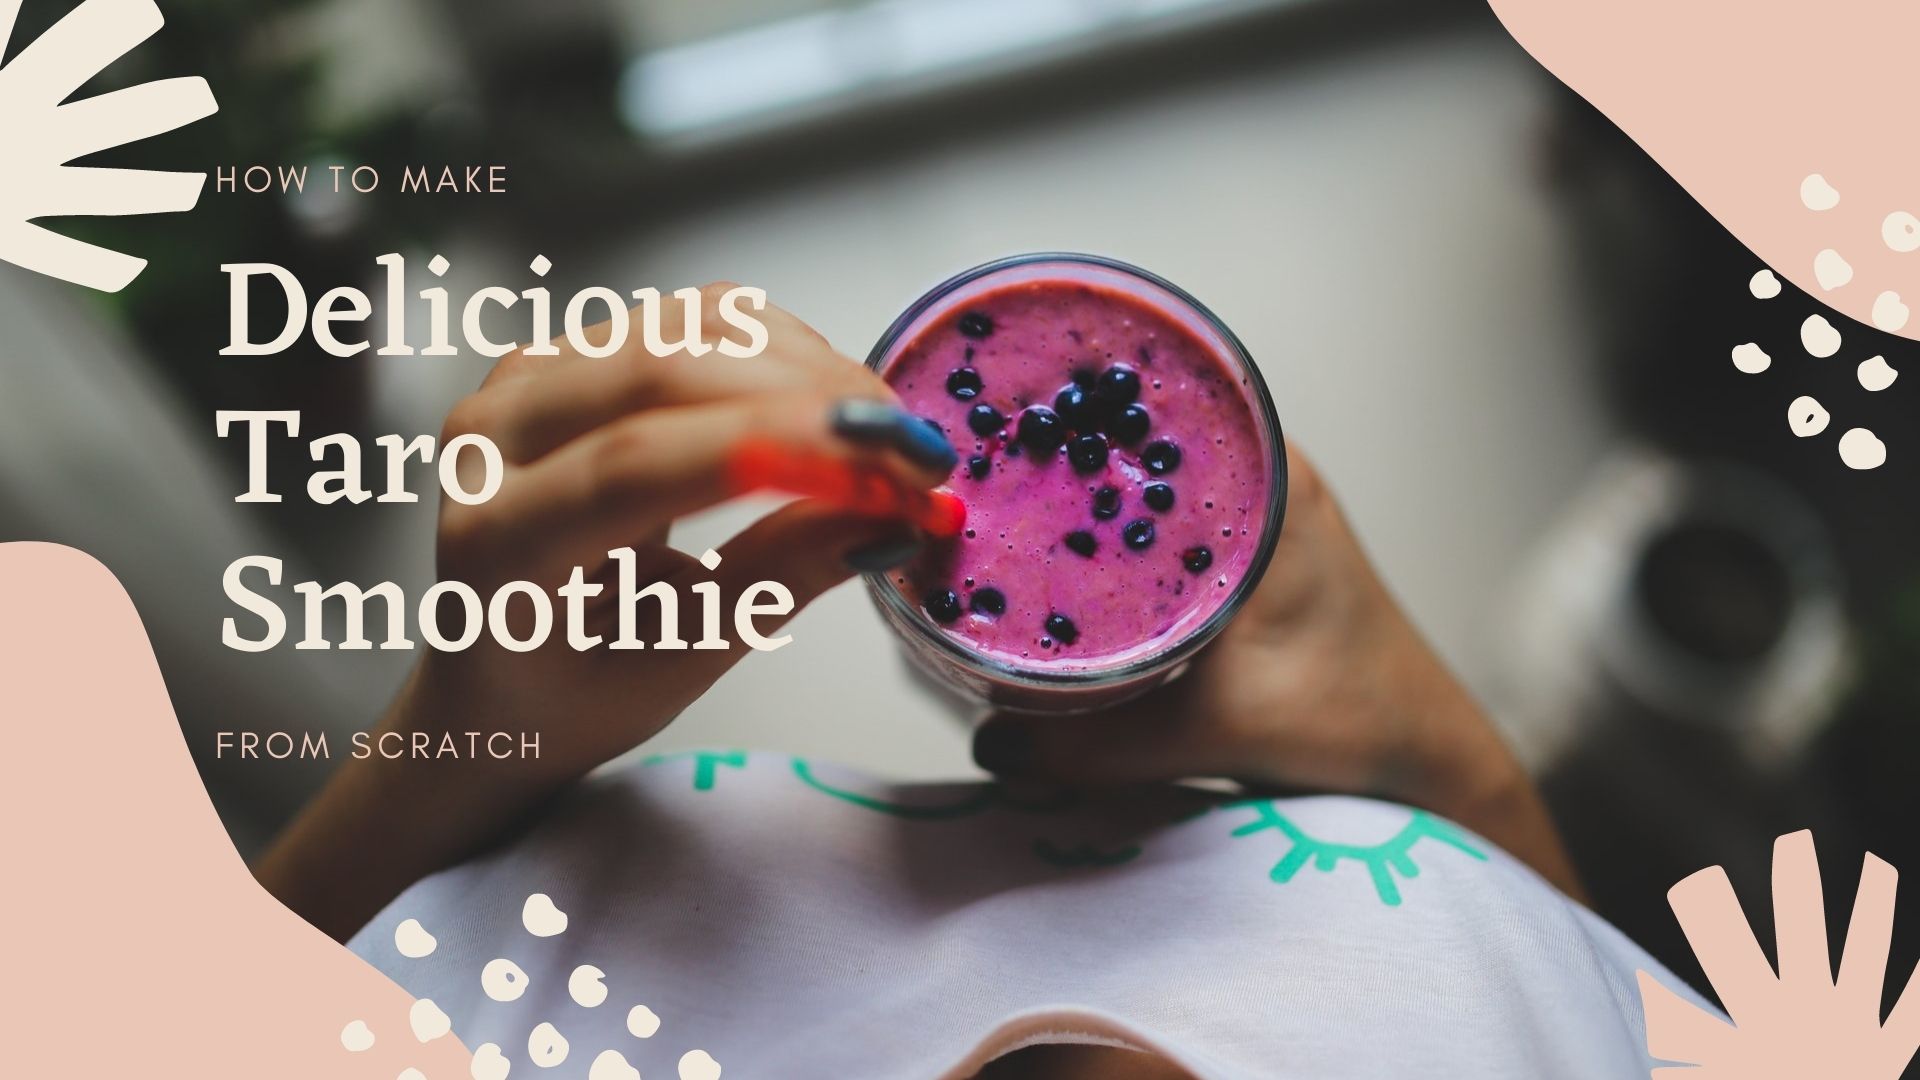 How To Make Delicious Taro Smoothie From Scratch